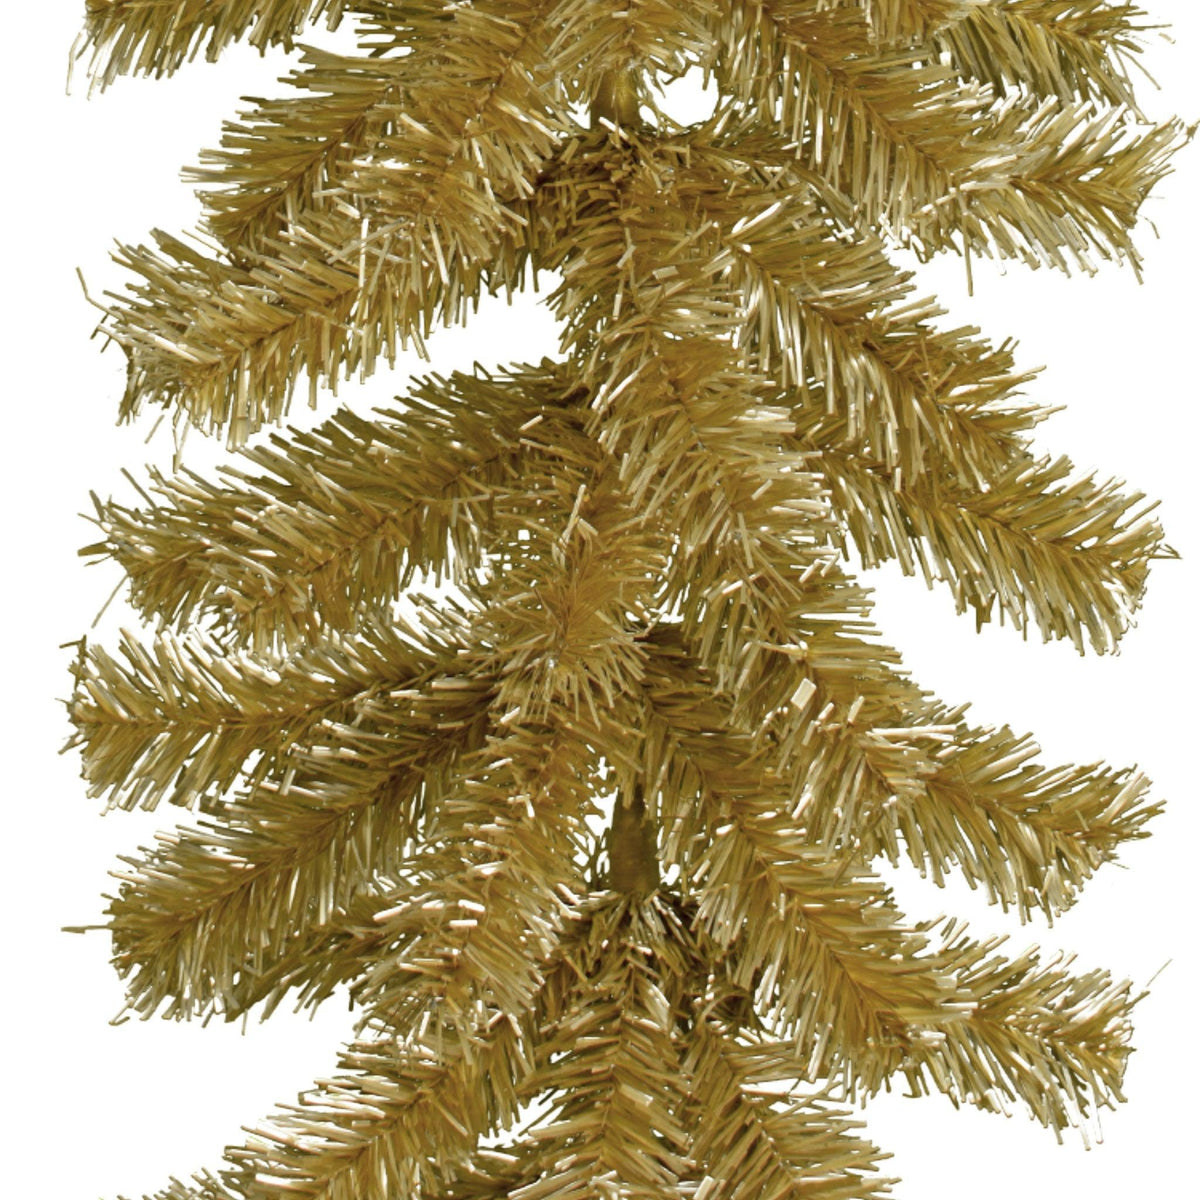 Celebrate Lee Display's 120th Anniversary with our brand new Antique Gold colored tinsel Christmas Brush Garland.  Sold in 6FT Lengths at leedisplay.com